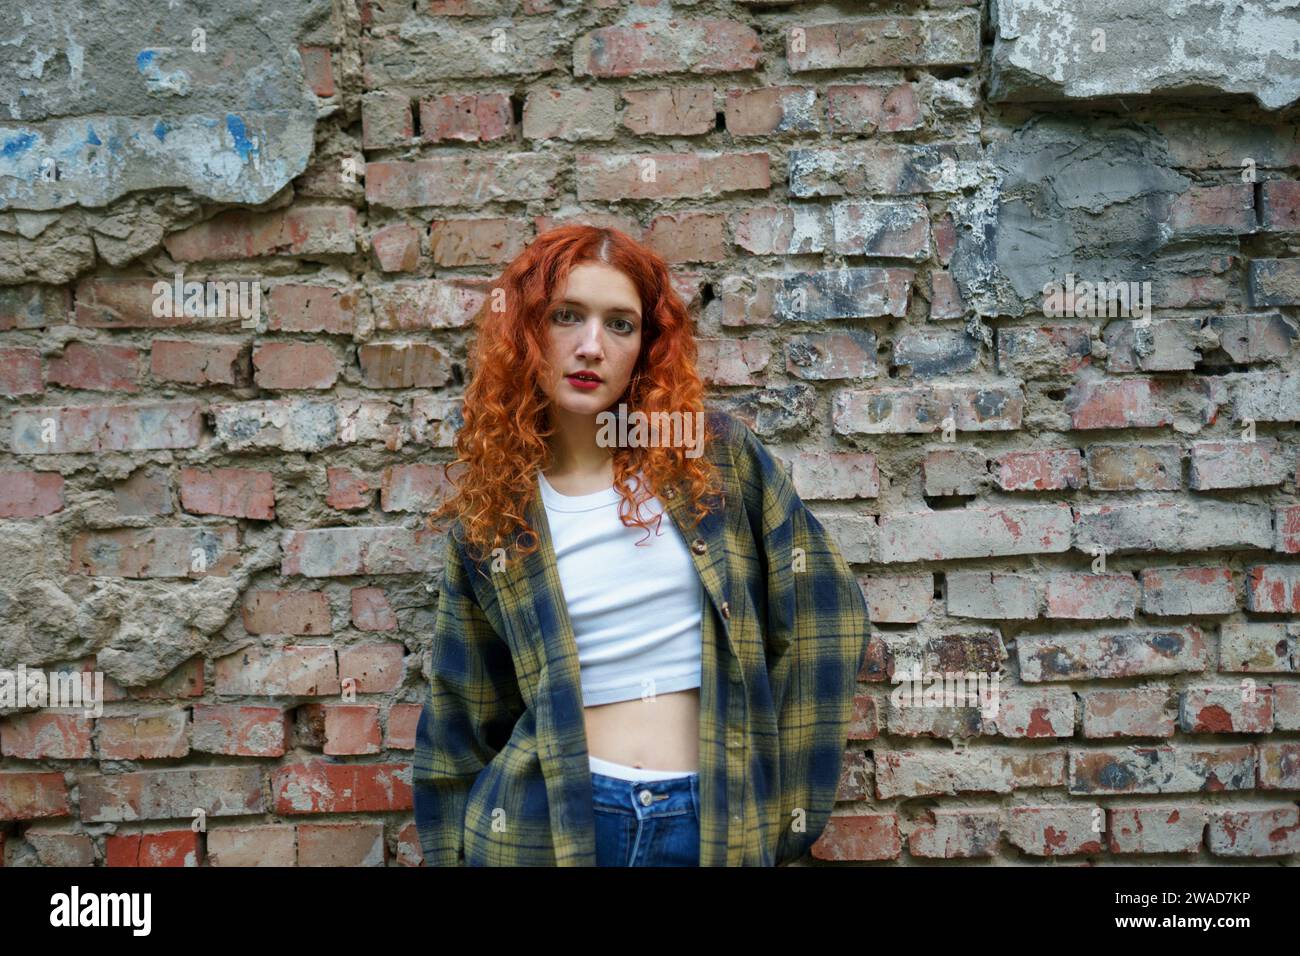 Redhaired woman posing next to old brick house Stock Photo